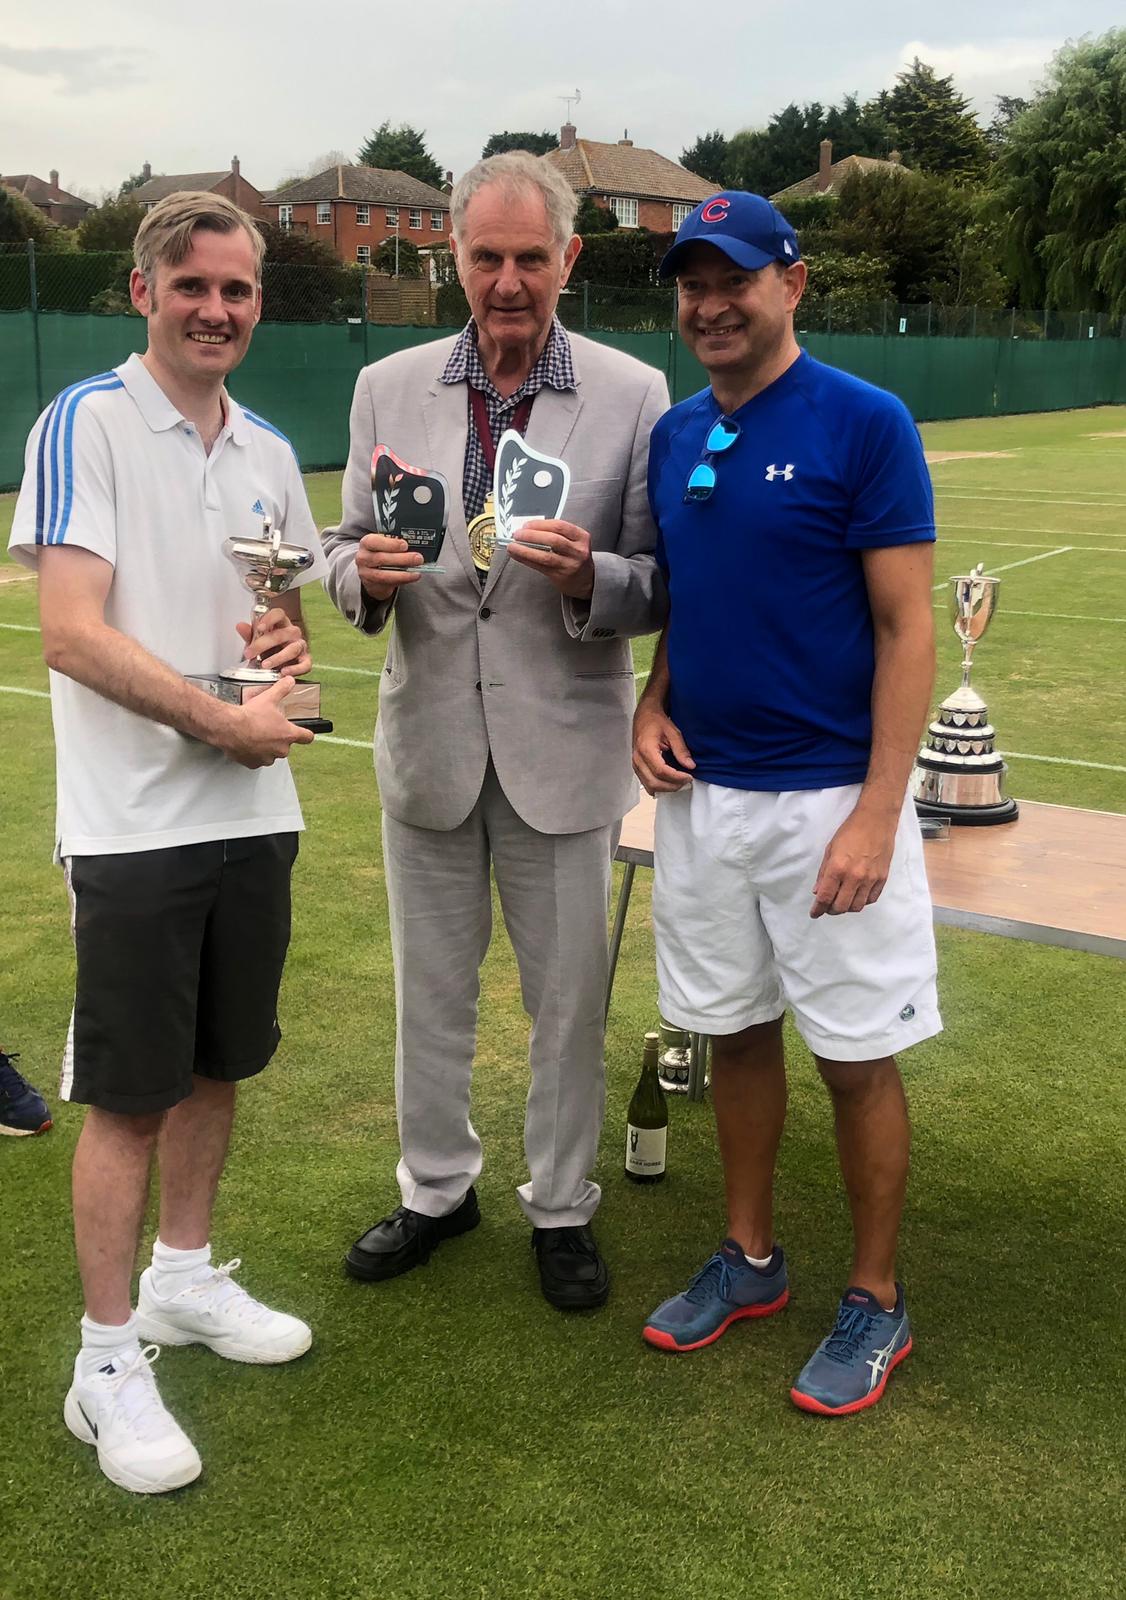 Matthew Sparrow and Paul Latarche – Winners in the Restricted Men’s Doubles